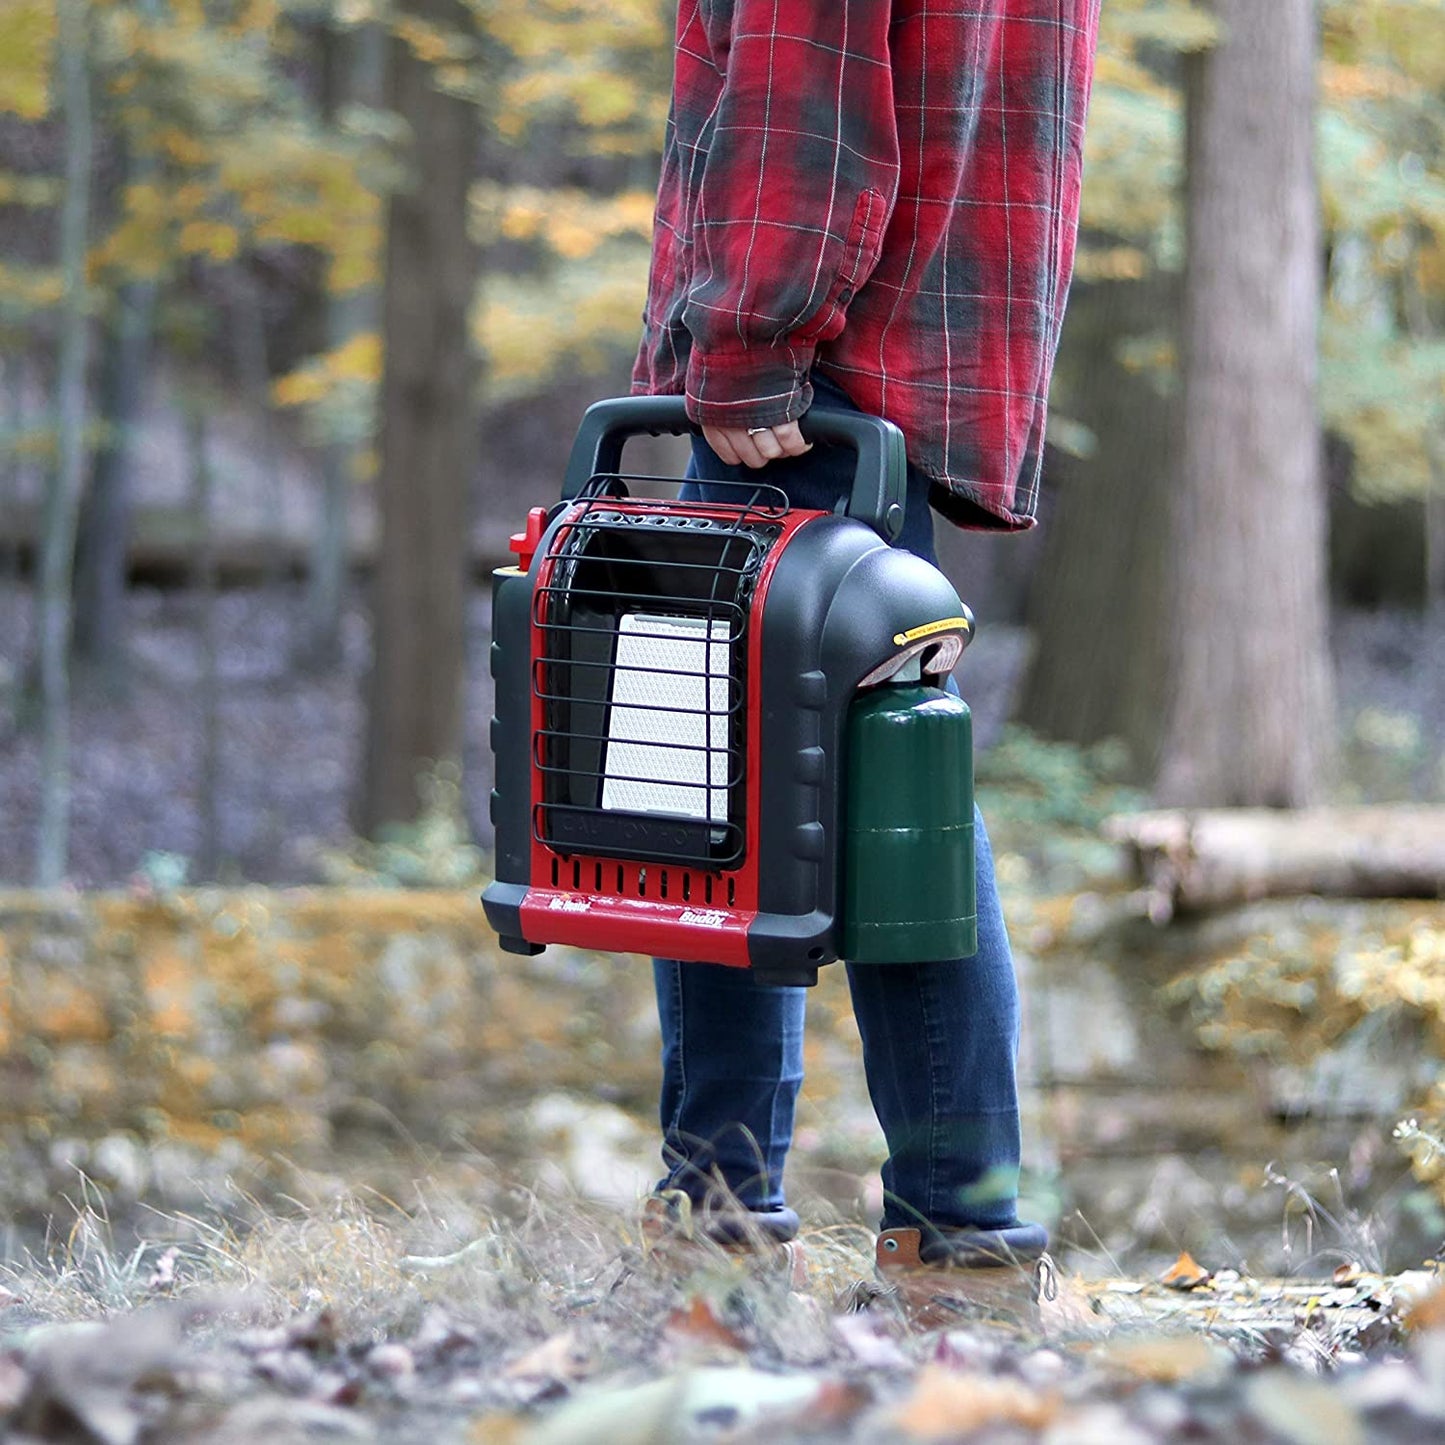 A person is carrying a red and black propane radiant heater in the woods.